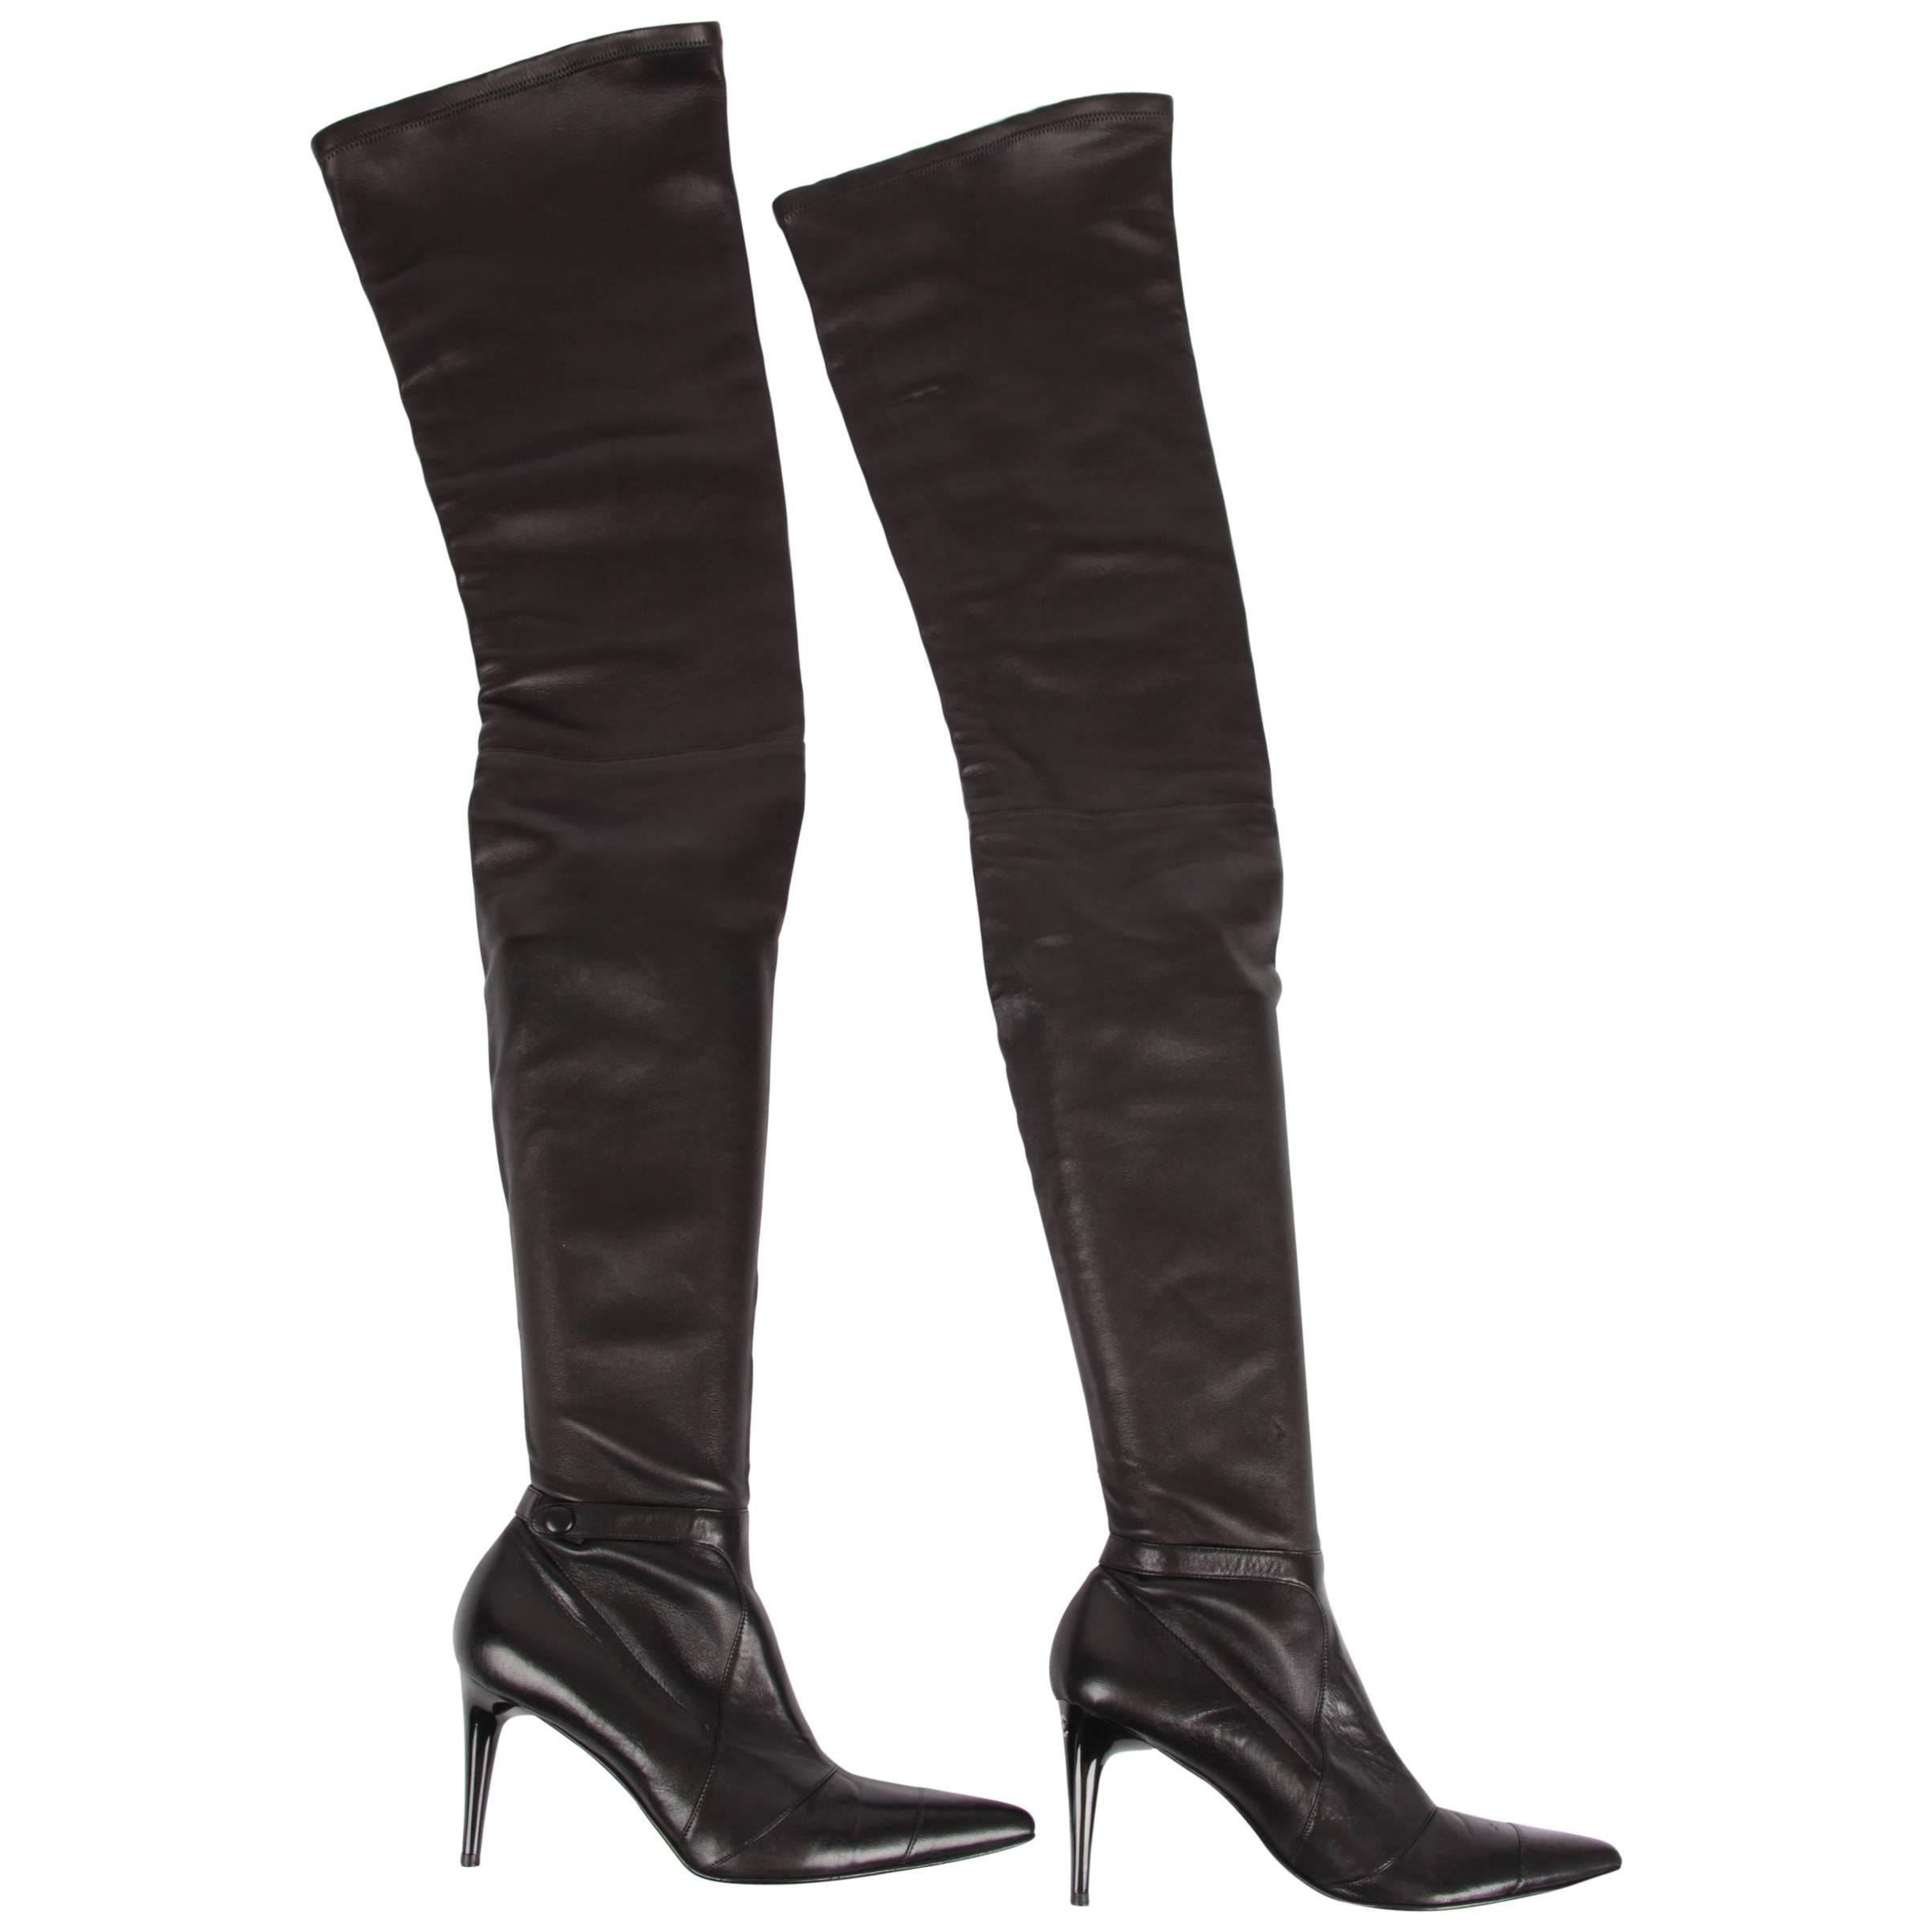 CHANEL 15B Lambskin Leather Tall Over The Knee High Wedge Heel Boots Black  $2400